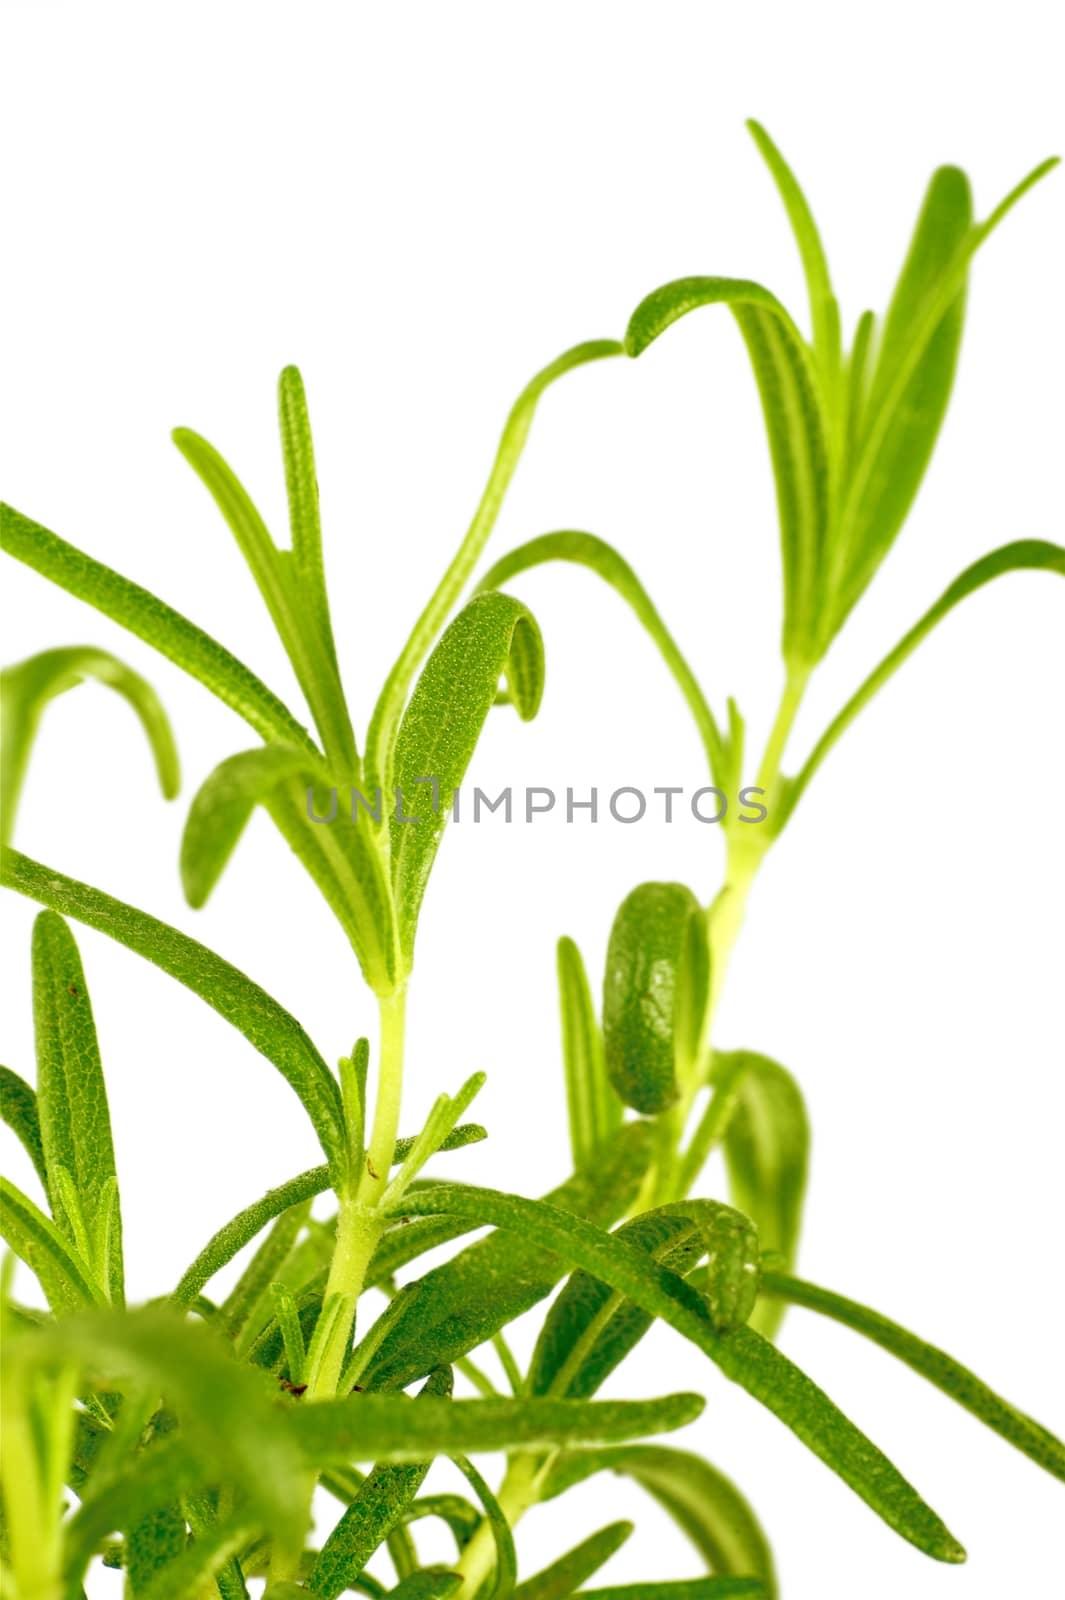 Rosemary Isolated on White. Rosemary is a Woody, Perennial Herb with Fragrant. Vertical Rosemary Closeup Photo.